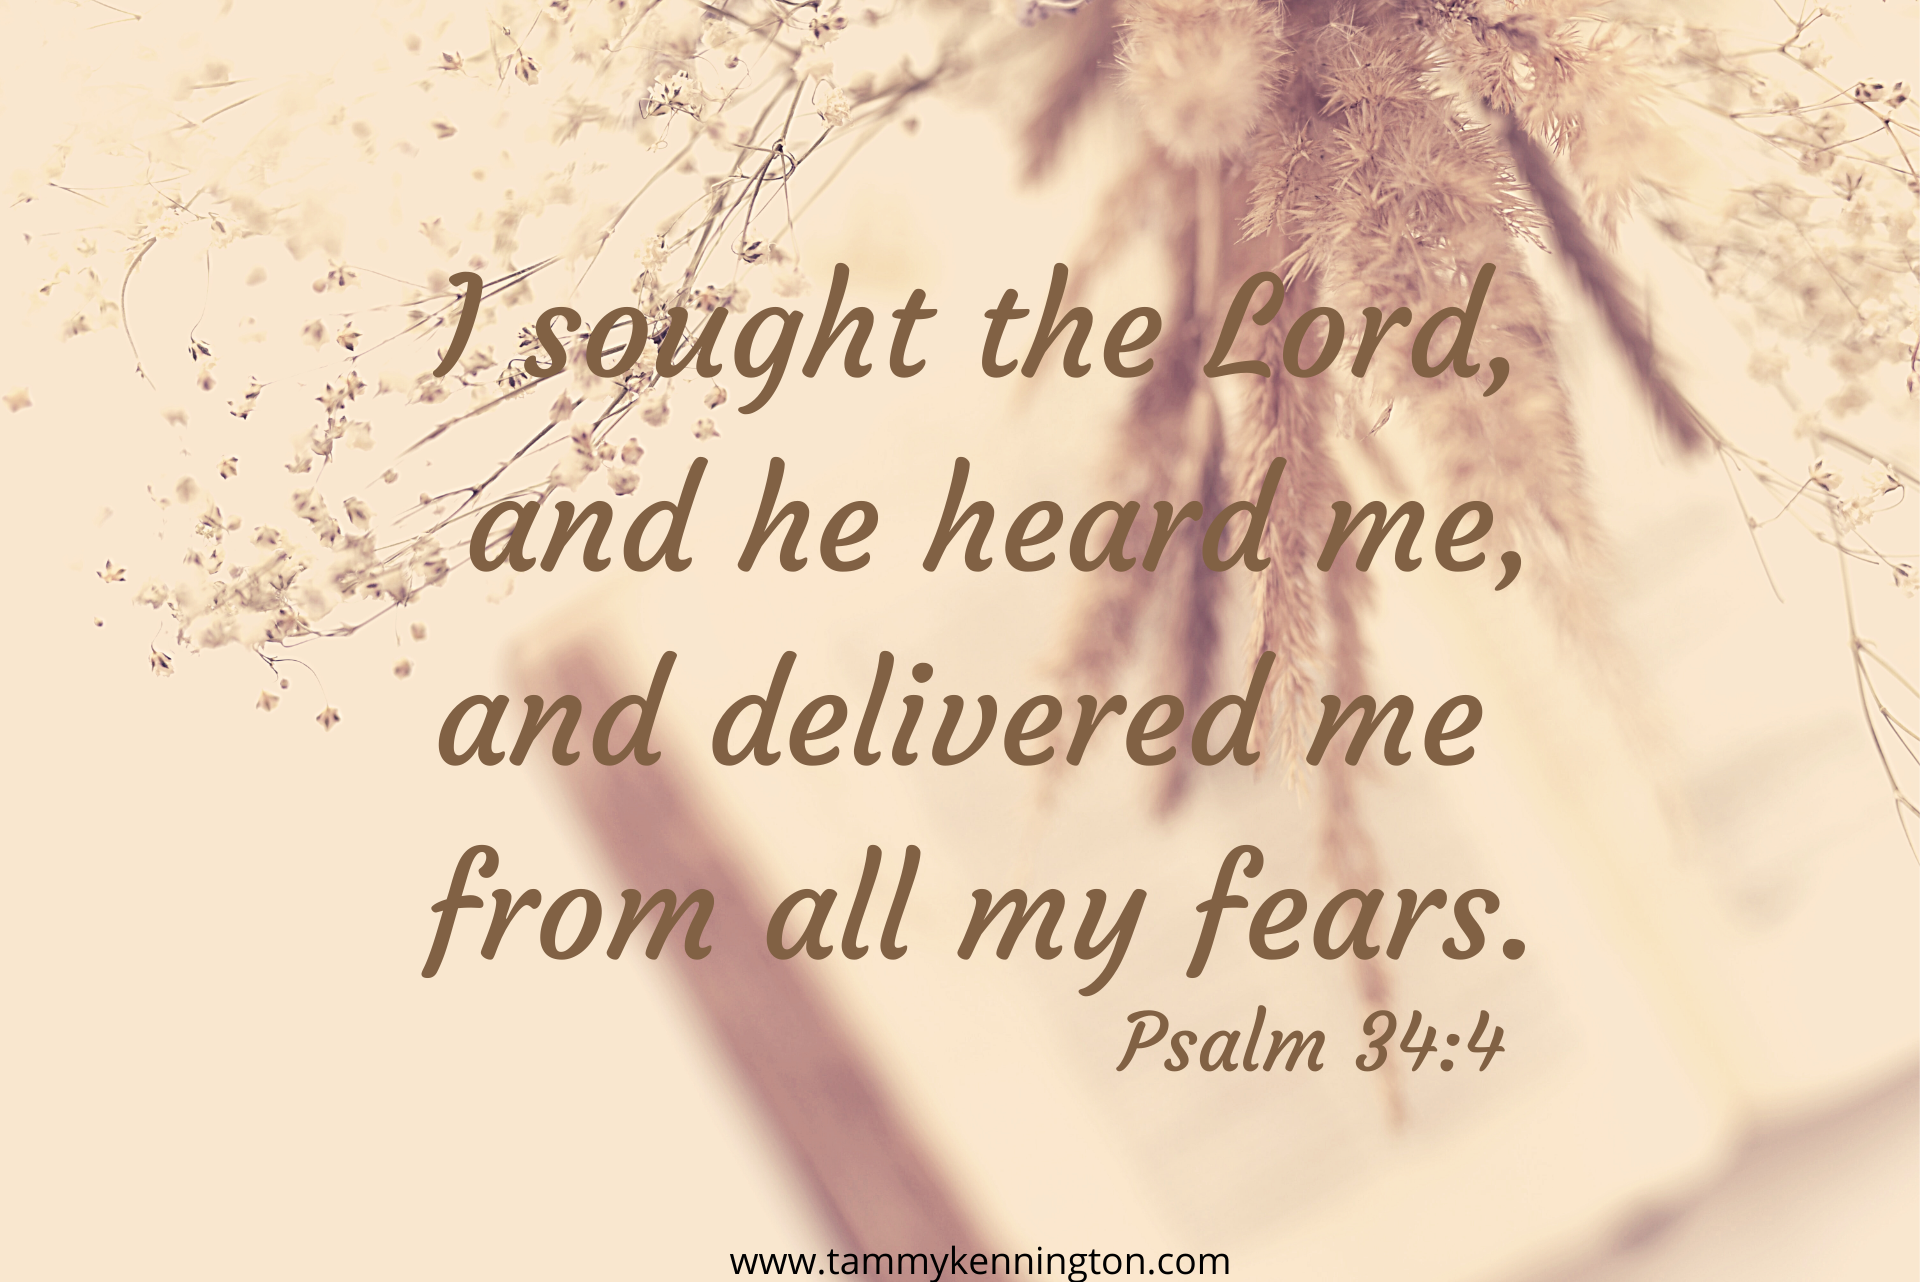 I sought the Lord, and he heard me, and delivered me from all my fears.